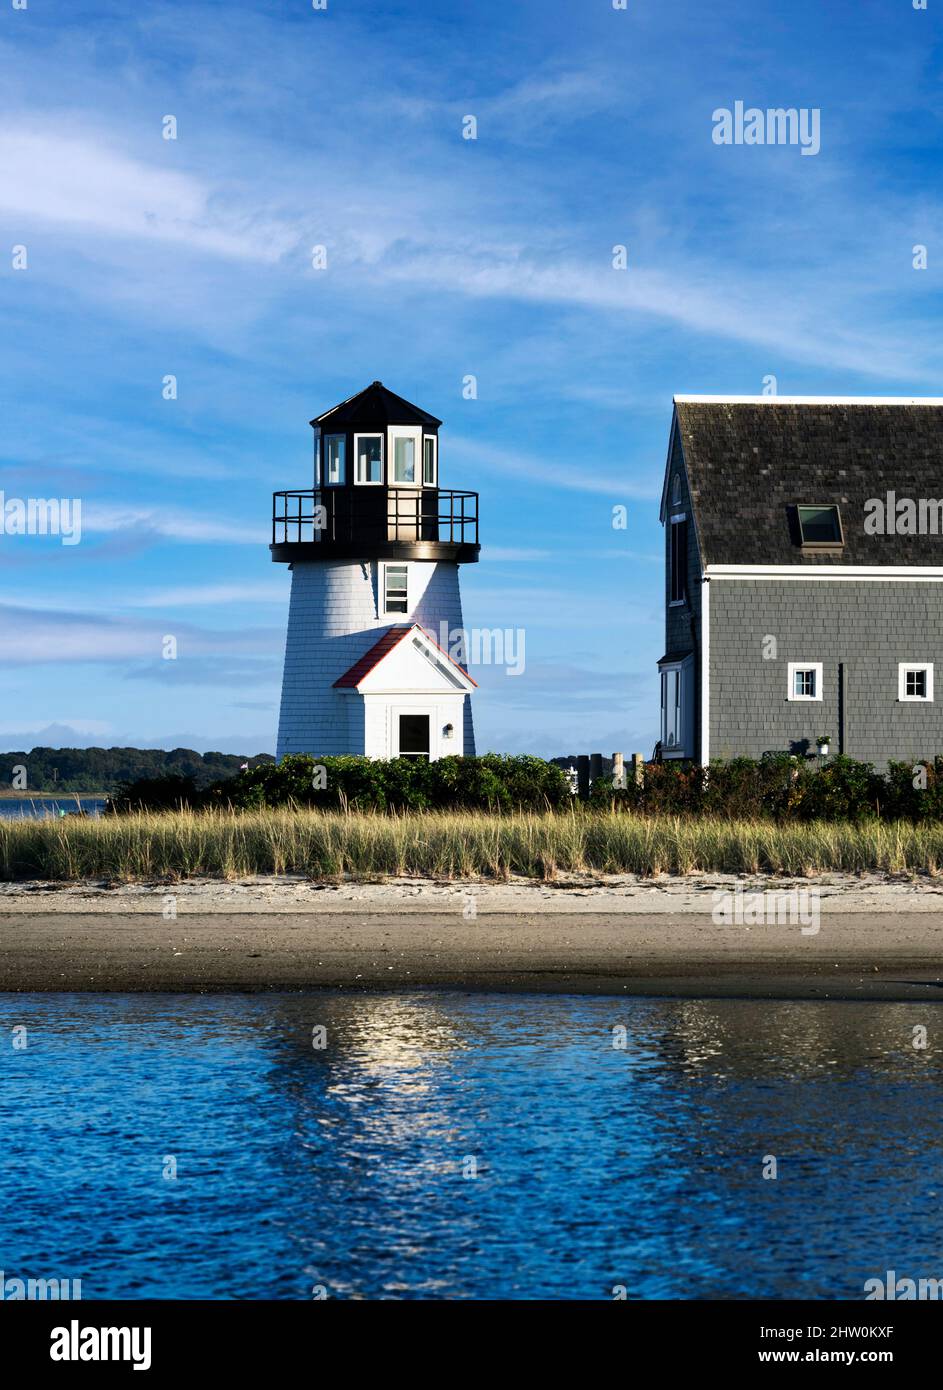 Hyannis Lighthouse, Hyannis, Cape Cod, USA. Stockfoto